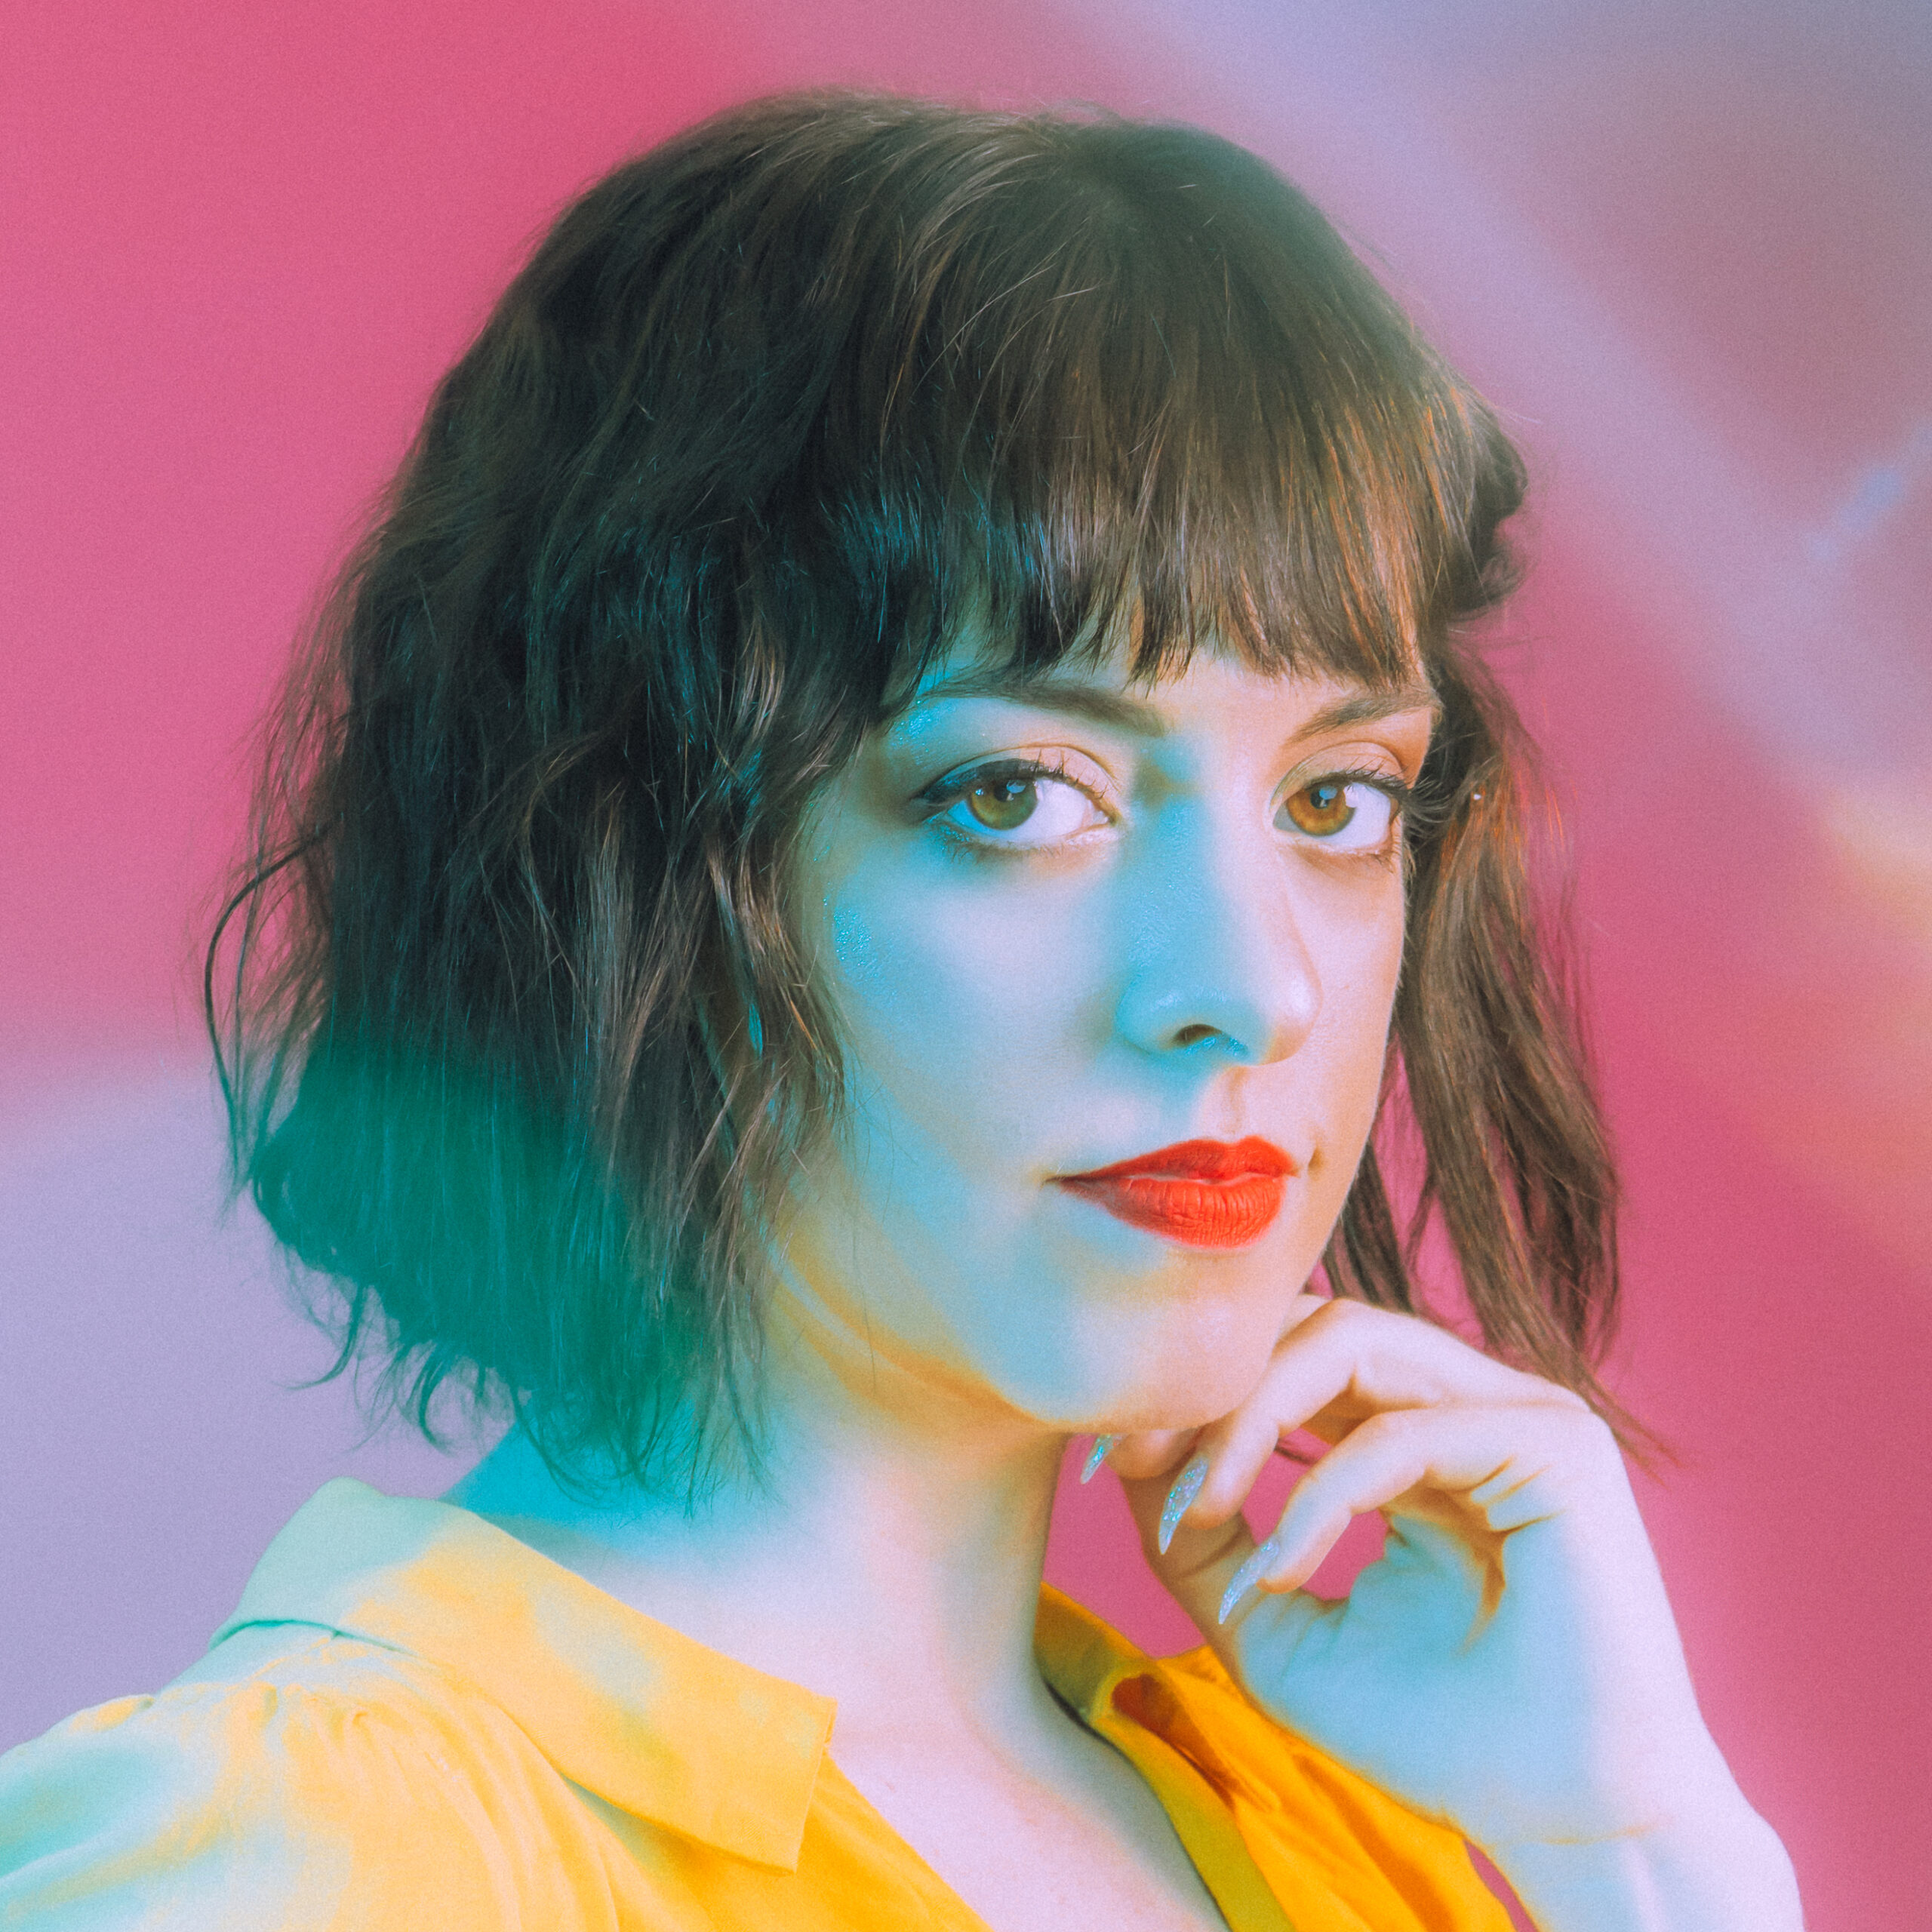 A vibrant portrait of an individual featuring dark short hair and bangs. The person is dressed in a yellow top and has her hand to her chin. The backdrop is a gradient pink.